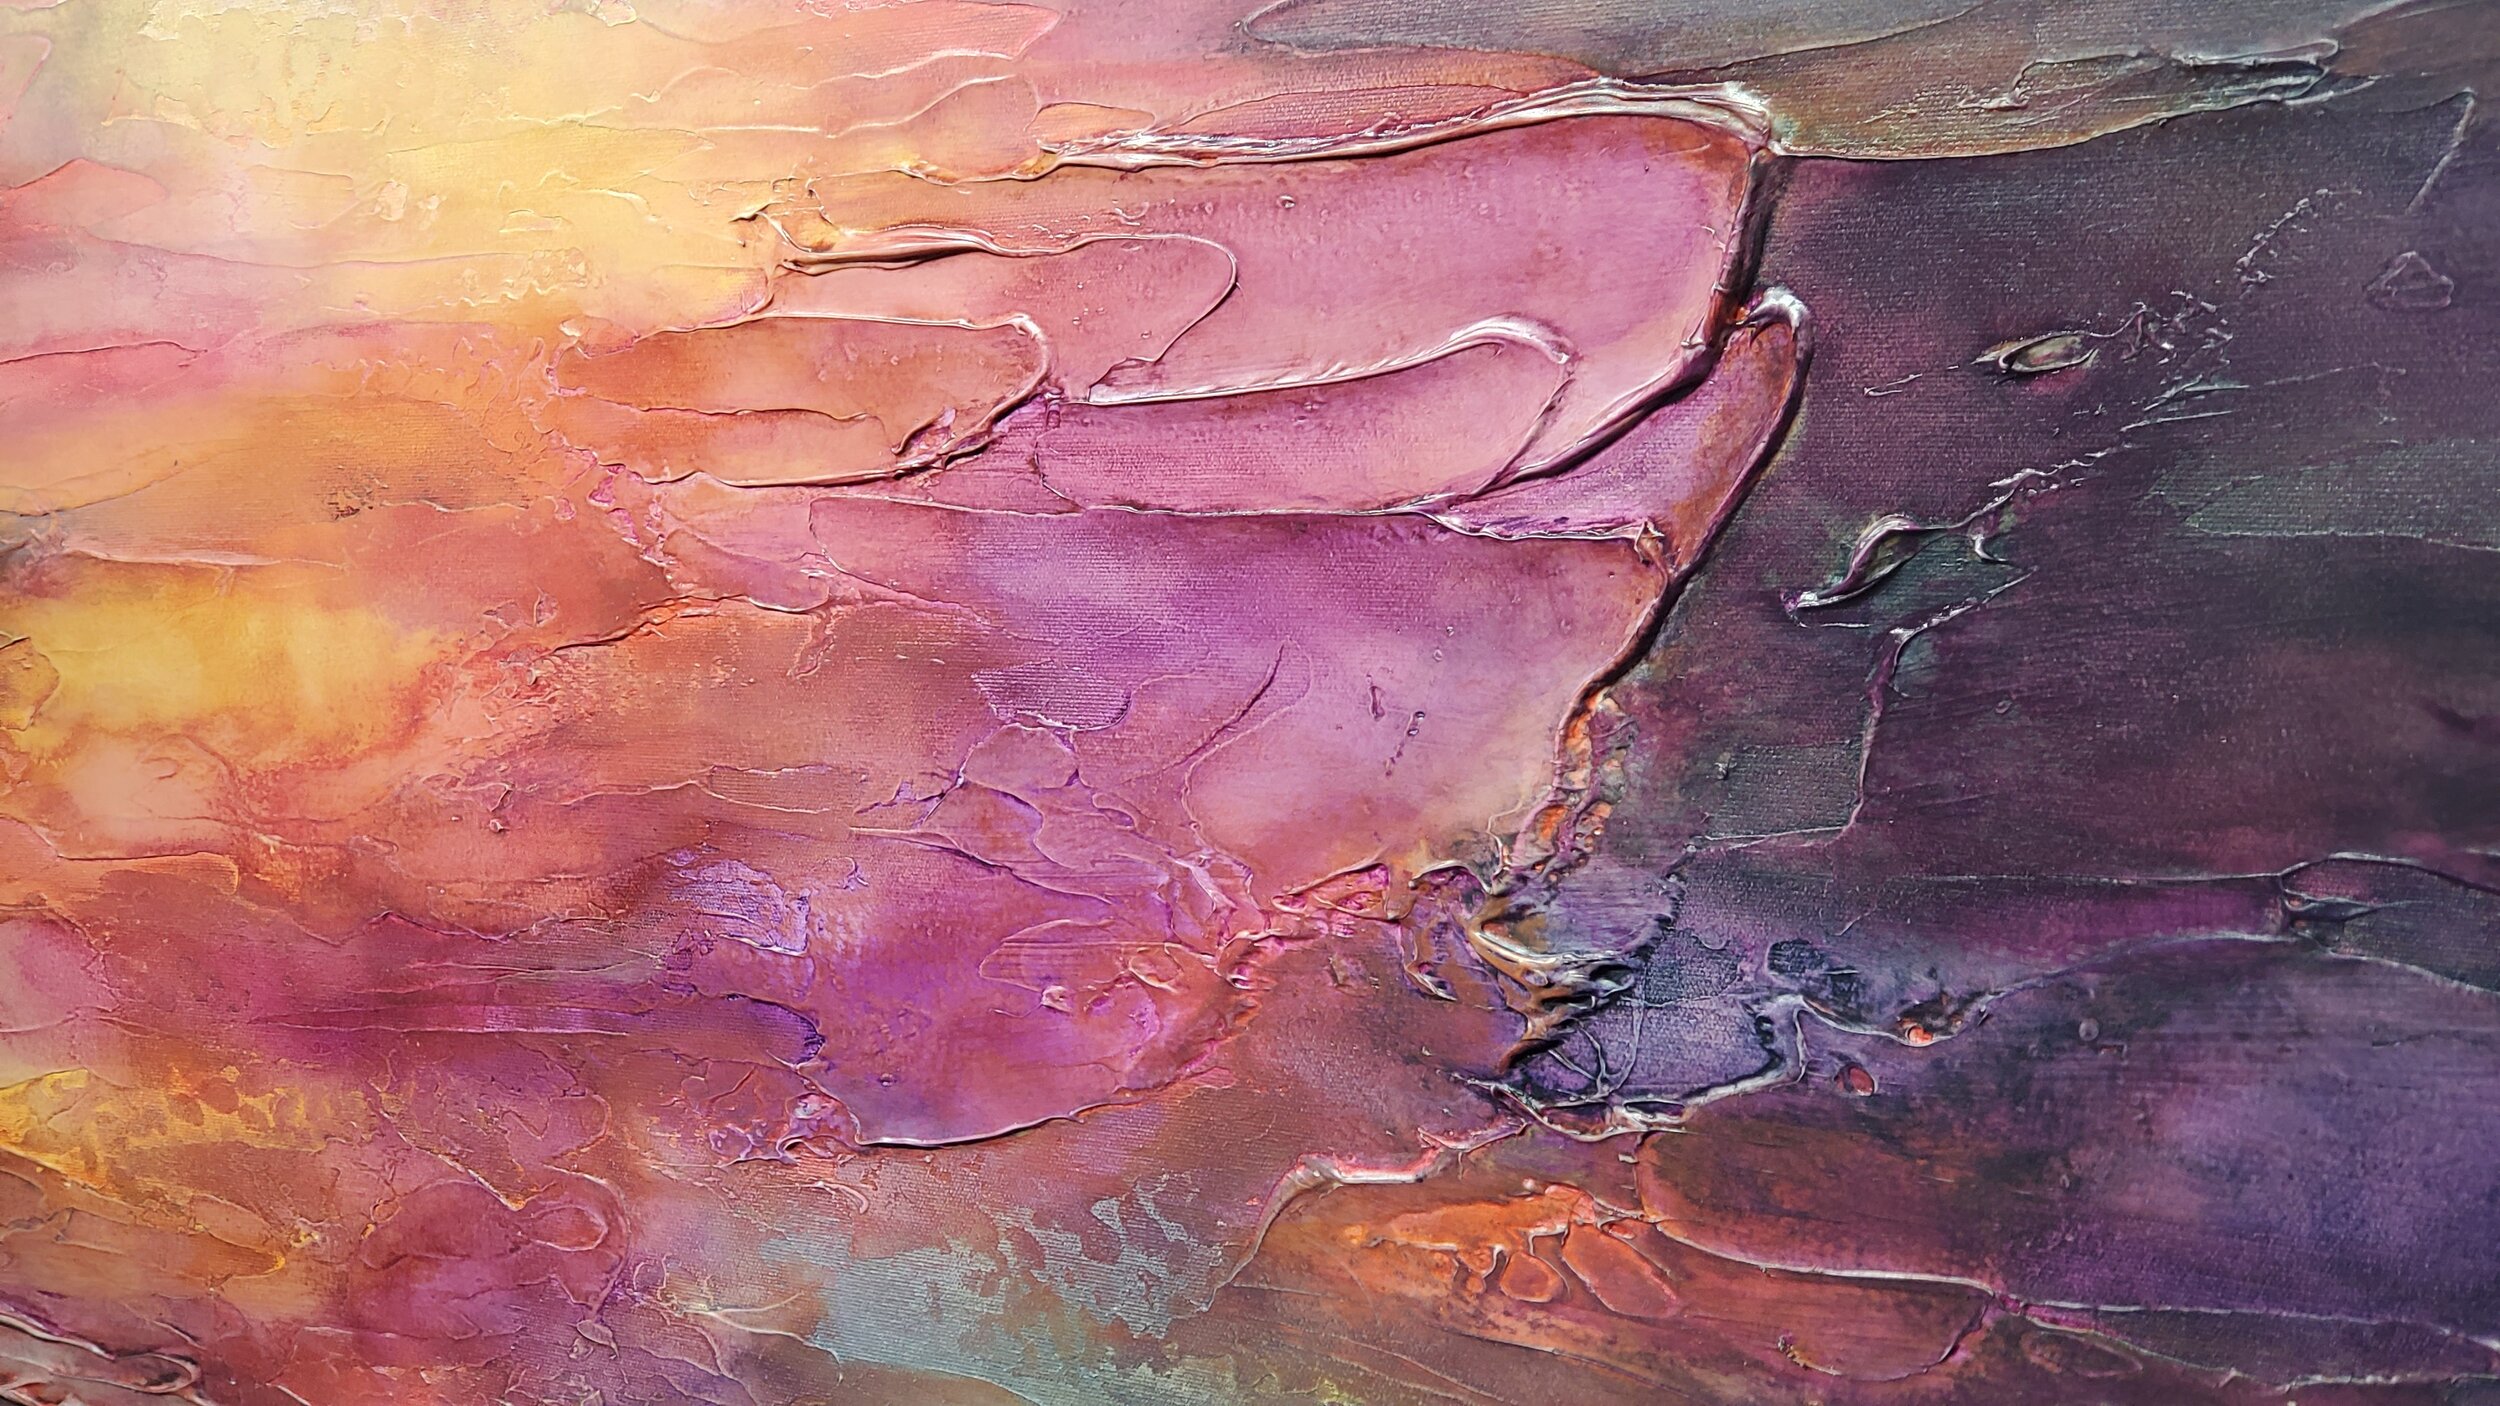  Painting #3 Accept- Vancouver abstract painter, Donna Giraud has eleven new available artworks for sale in her 2020 solo art exhibition titled, Lost and Found. Her large scale, abstract, textural artworks are perfect for any interior design aestheti